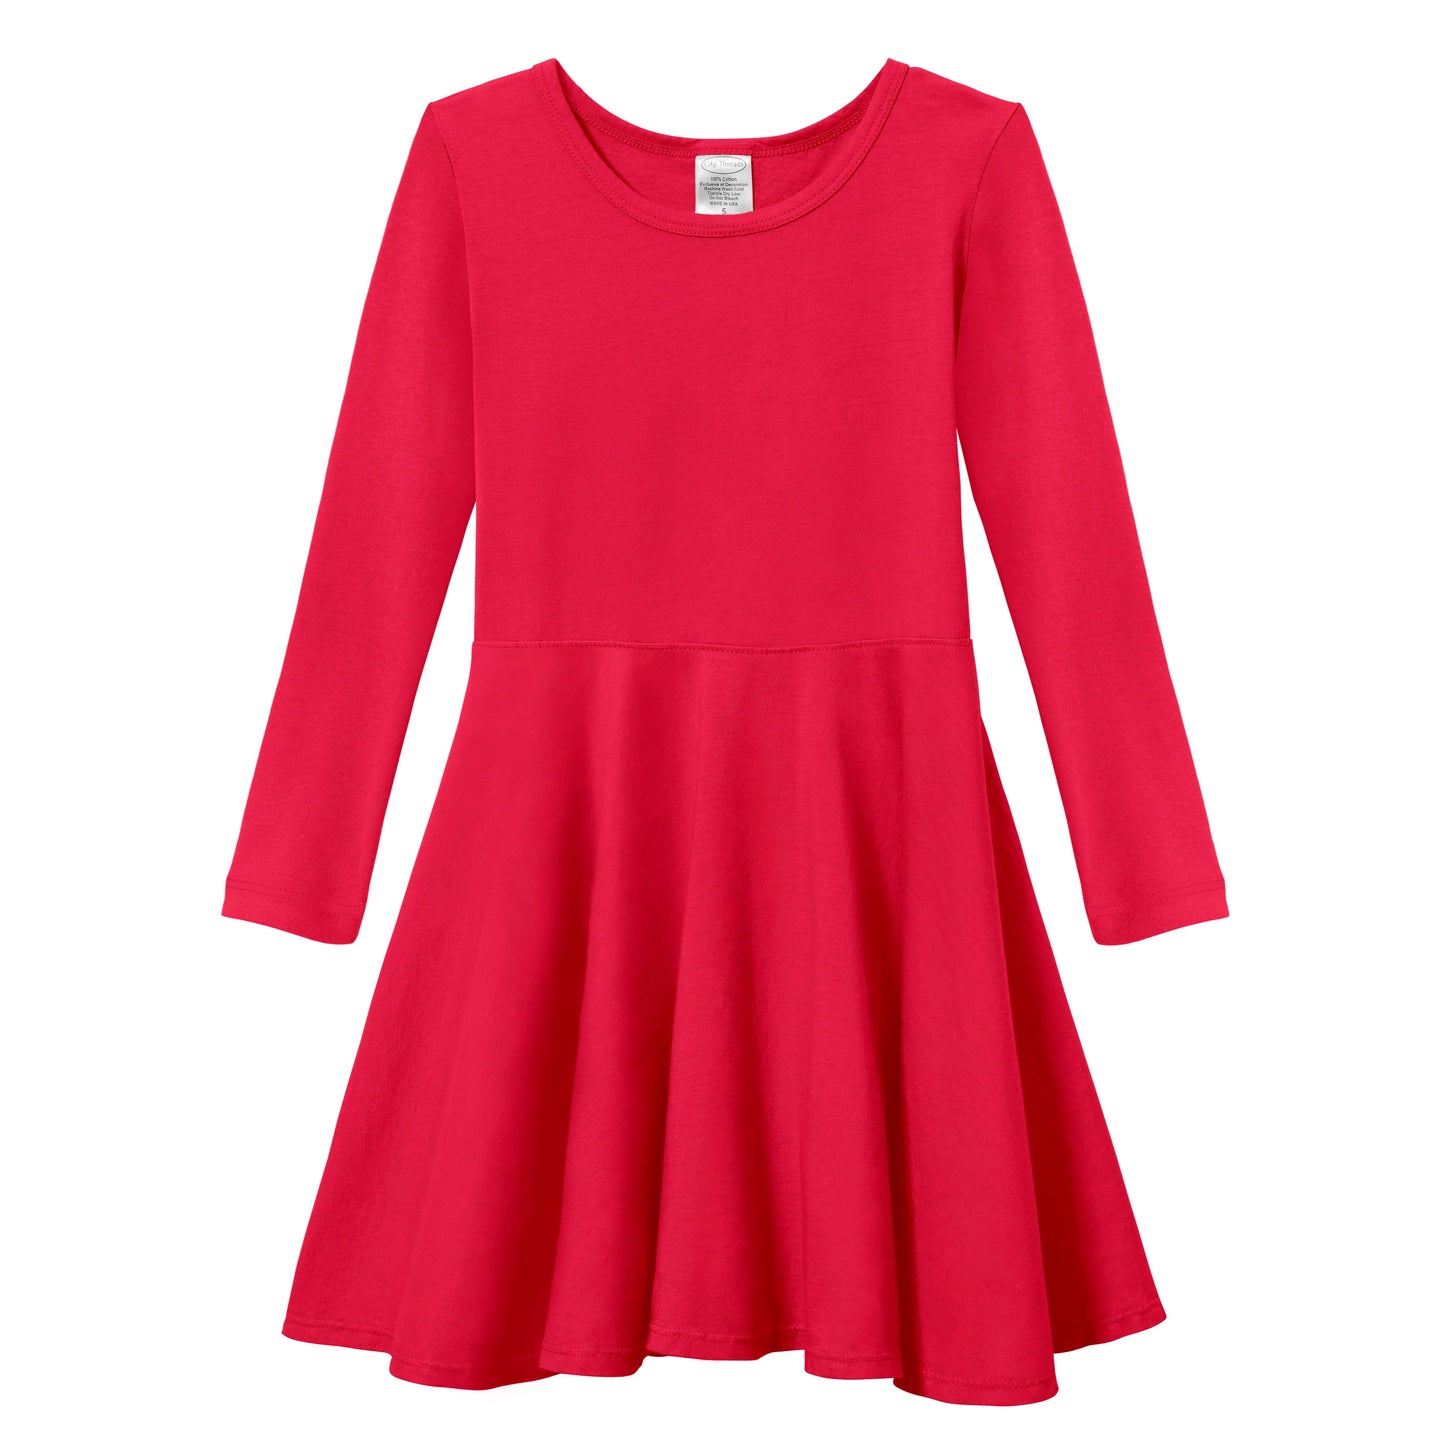 Made in USA Red Long Sleeve Twirly Toddler Dress